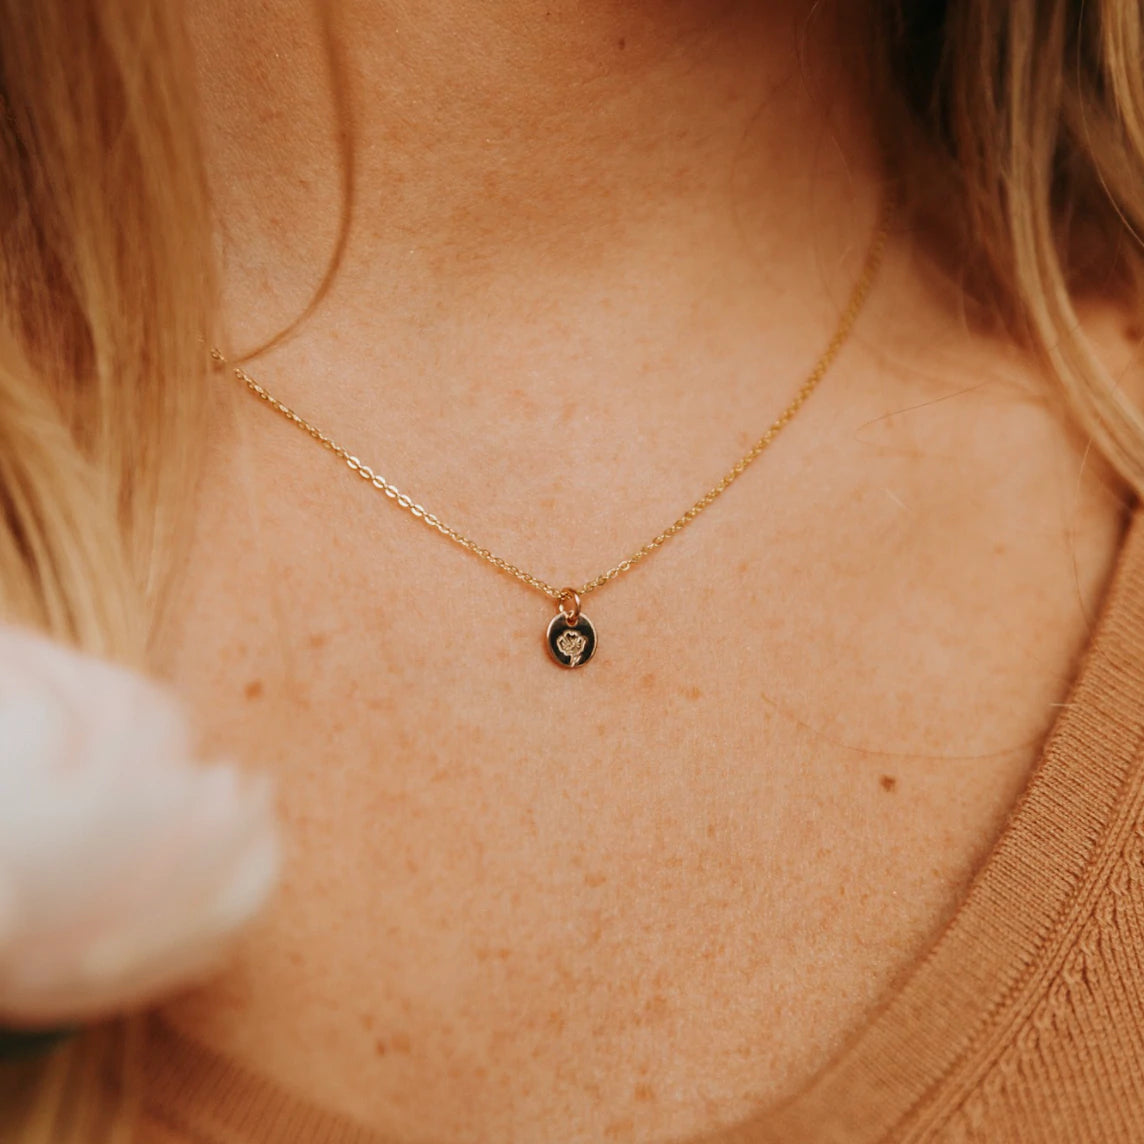 Made by Mary The Little's Collection | Gold Filled Mini Birth Flower Necklace - August / Poppy 